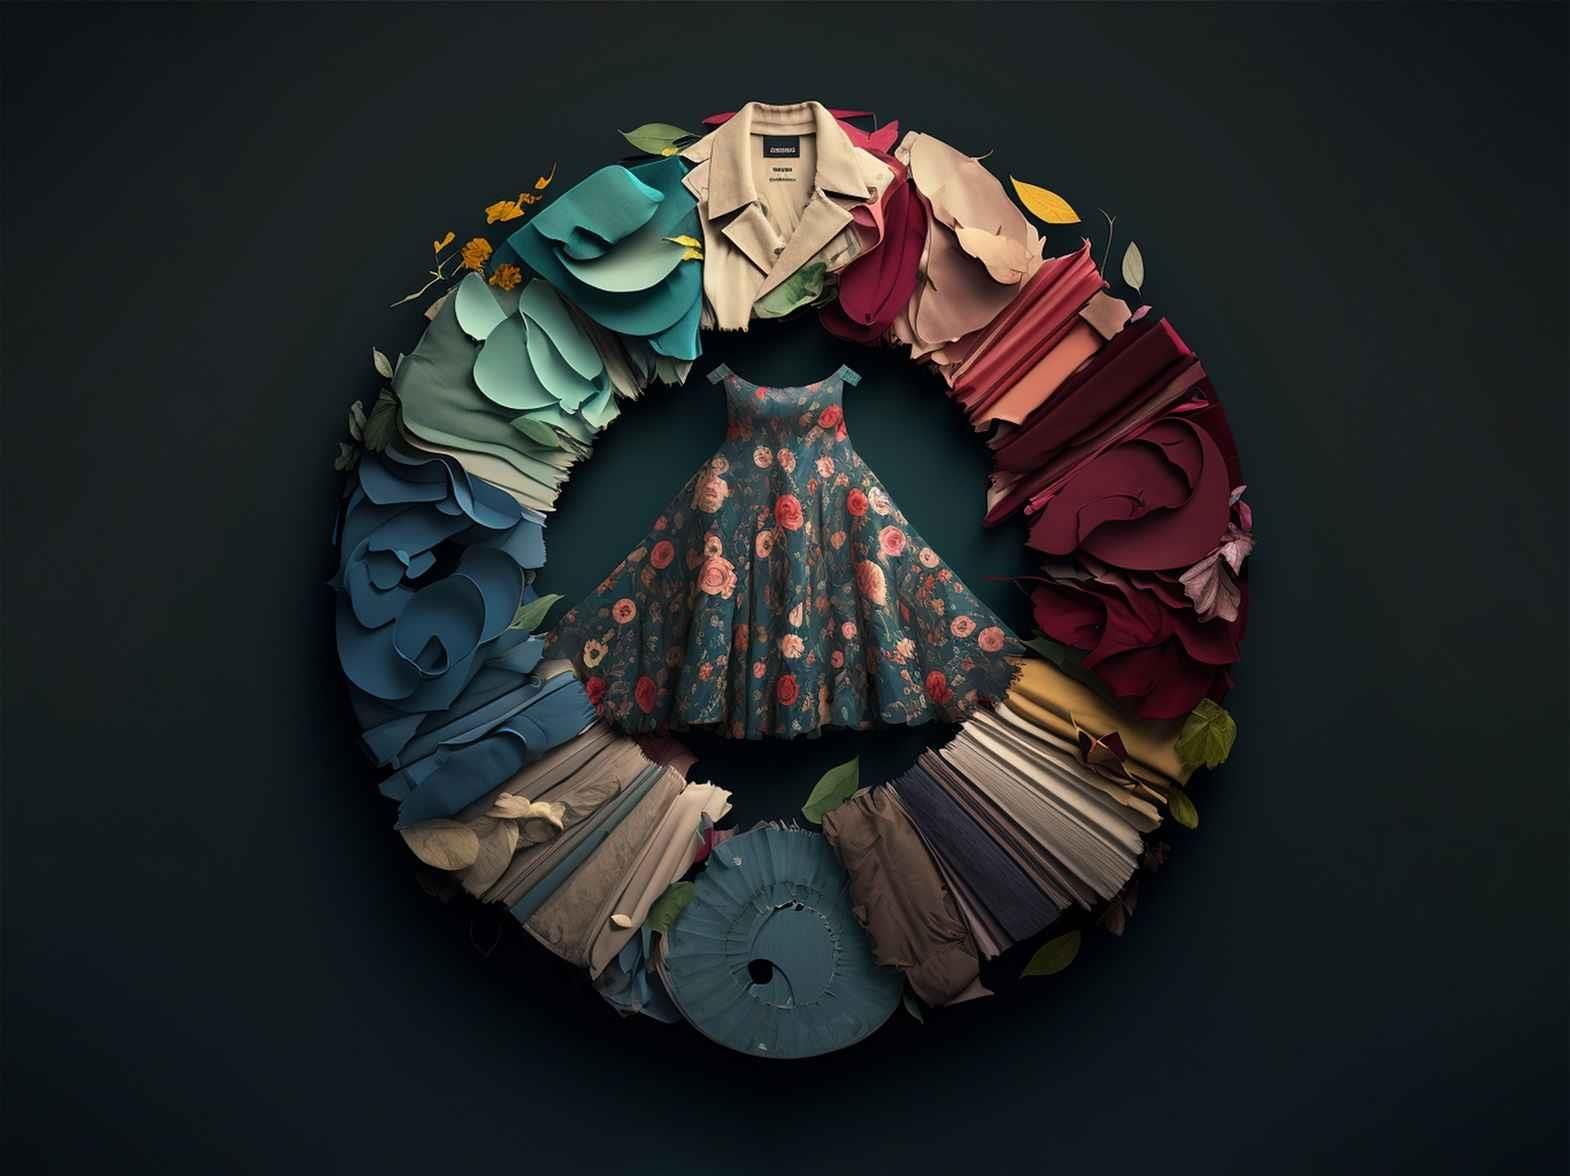 Circular Economy in Fashion: Global Policies and Challenges